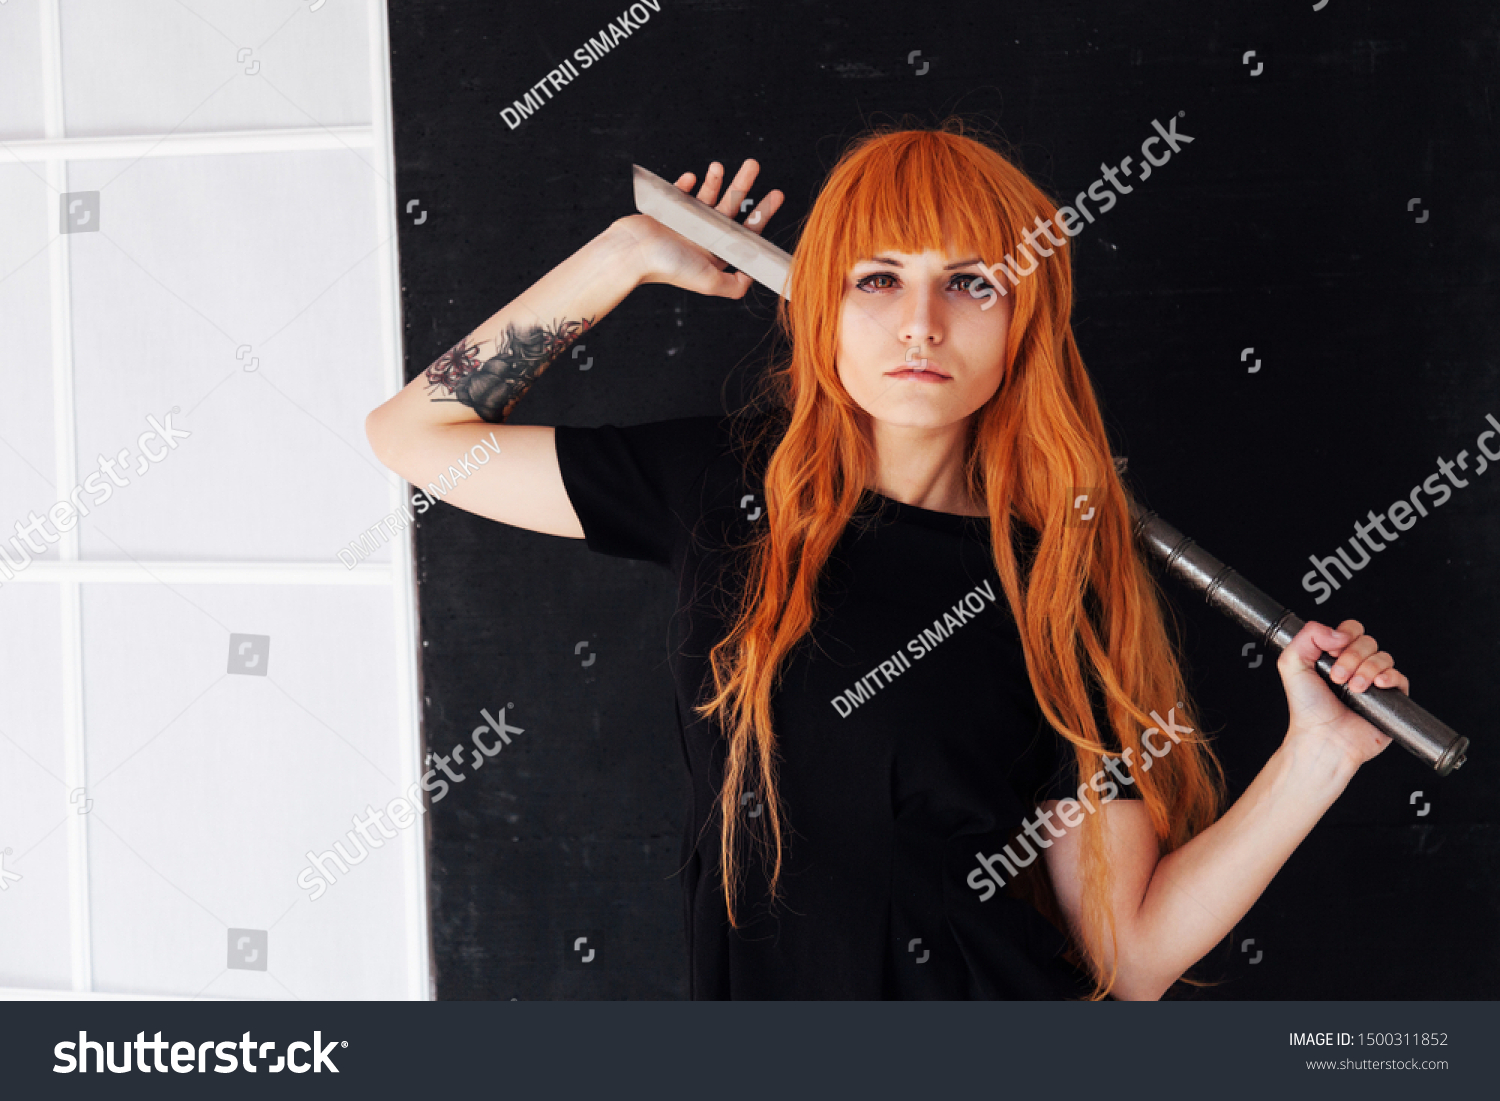 Young Woman Japanese Anime Cosplay Holding Stock Photo Edit Now